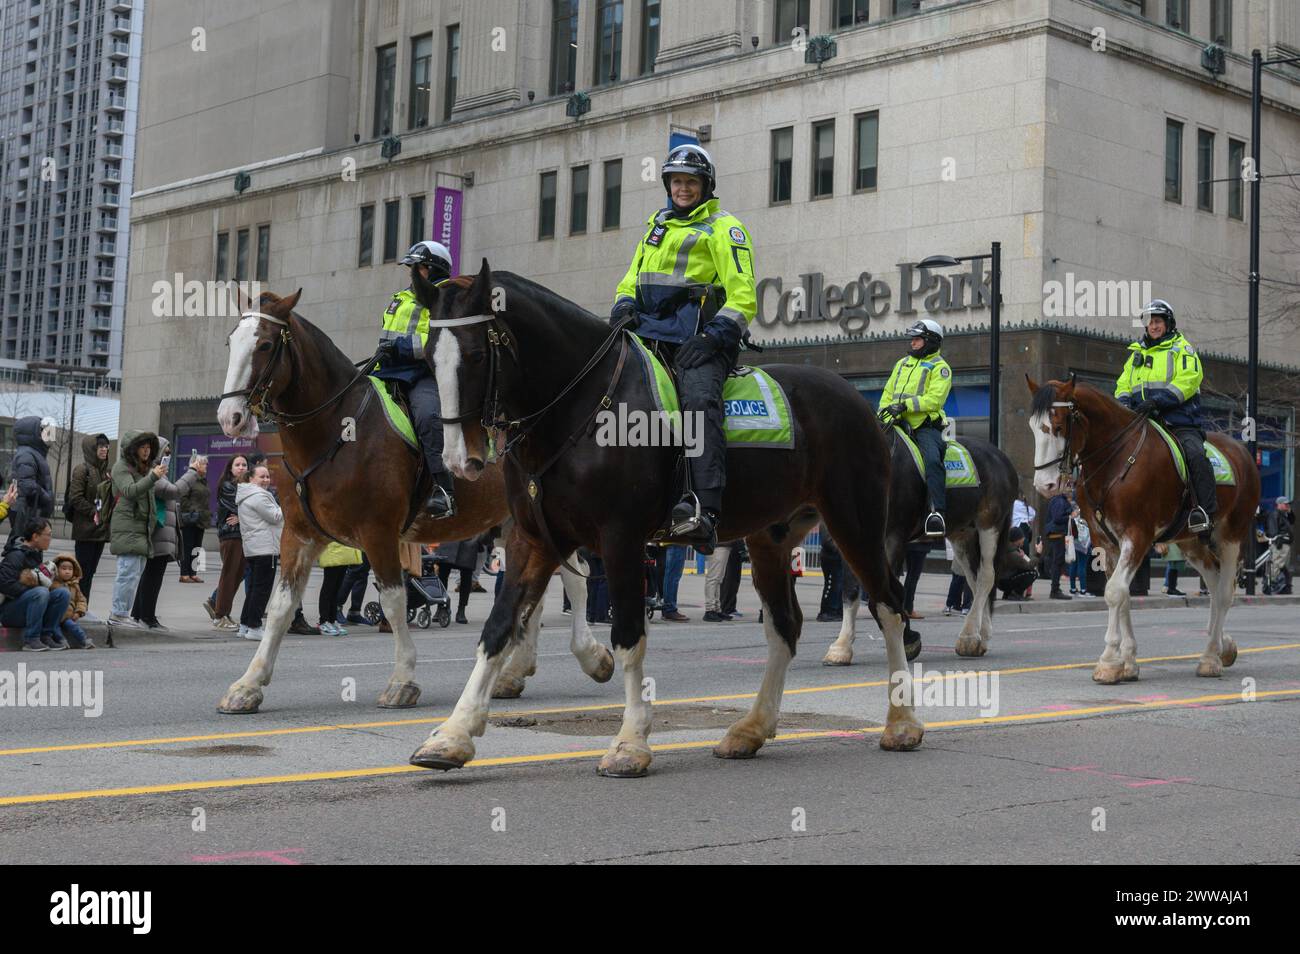 Toronto, ON, Canada - March 17, 2024: Mounted police patrol the streets of Toronto Stock Photo